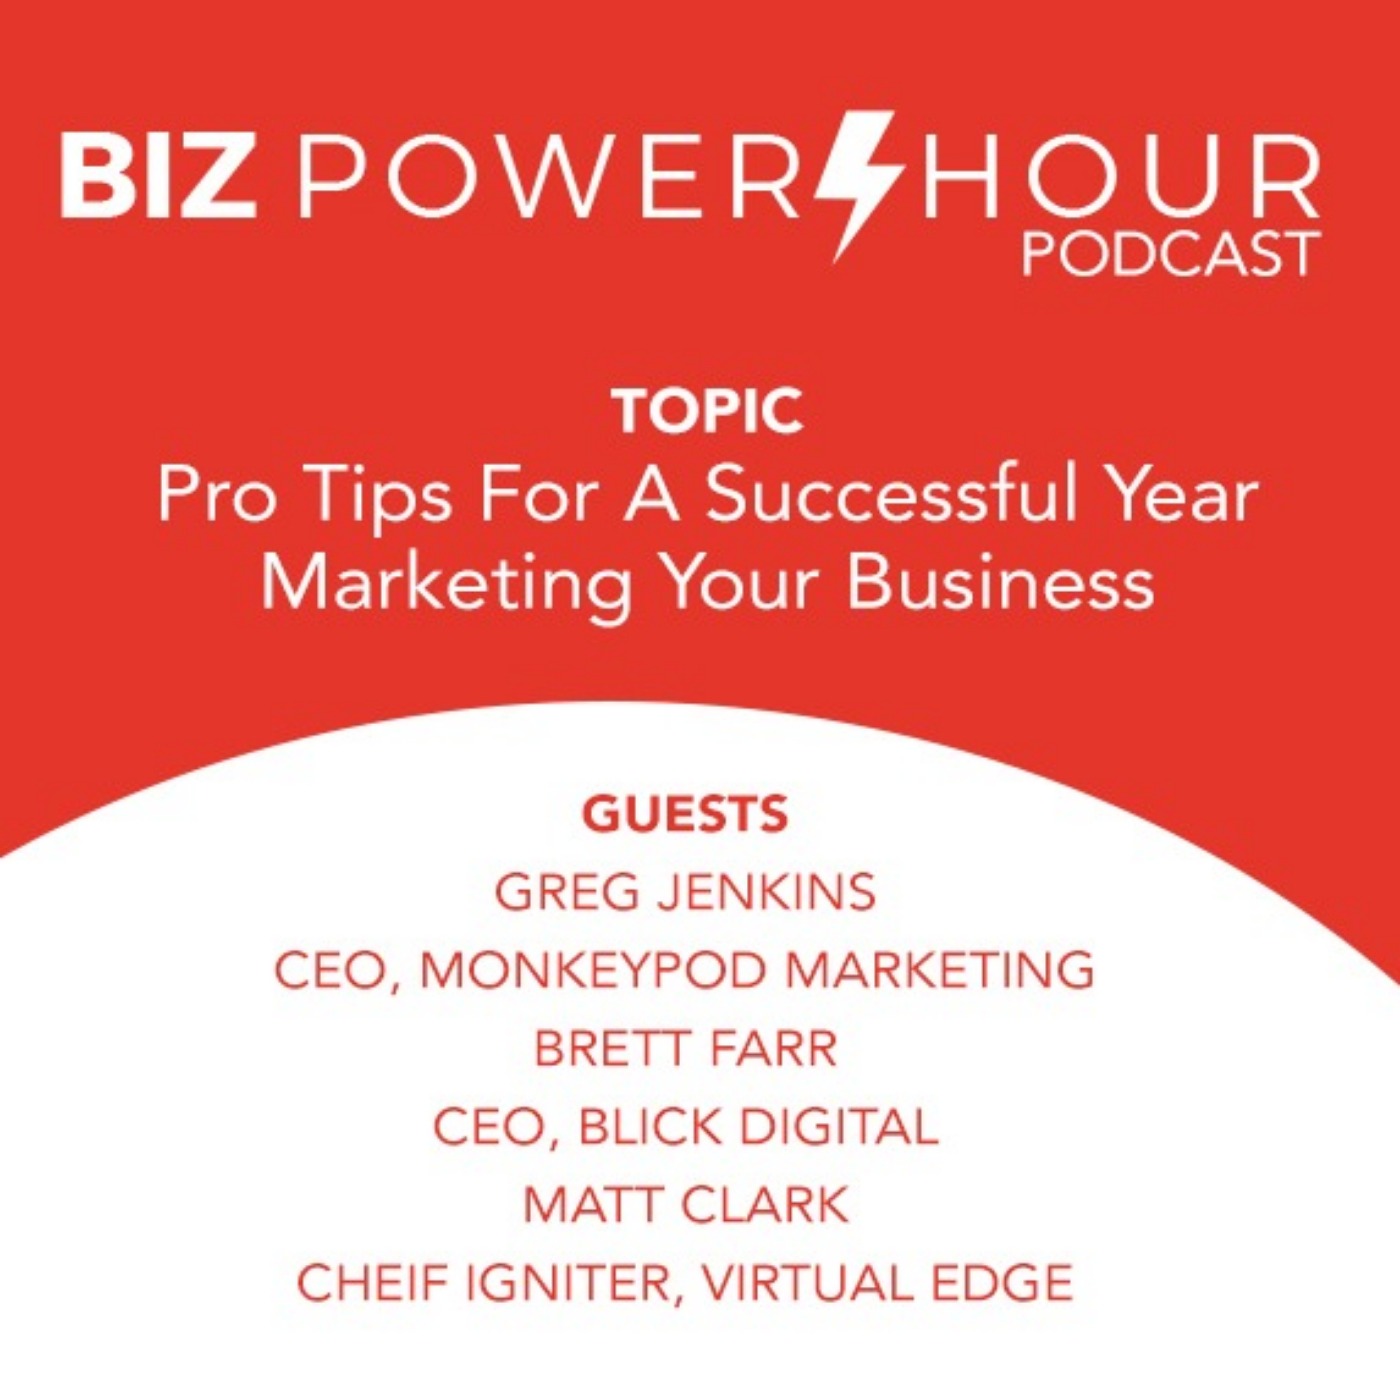 EP2 - Pro Tips For A Successful Year Marketing Your Business